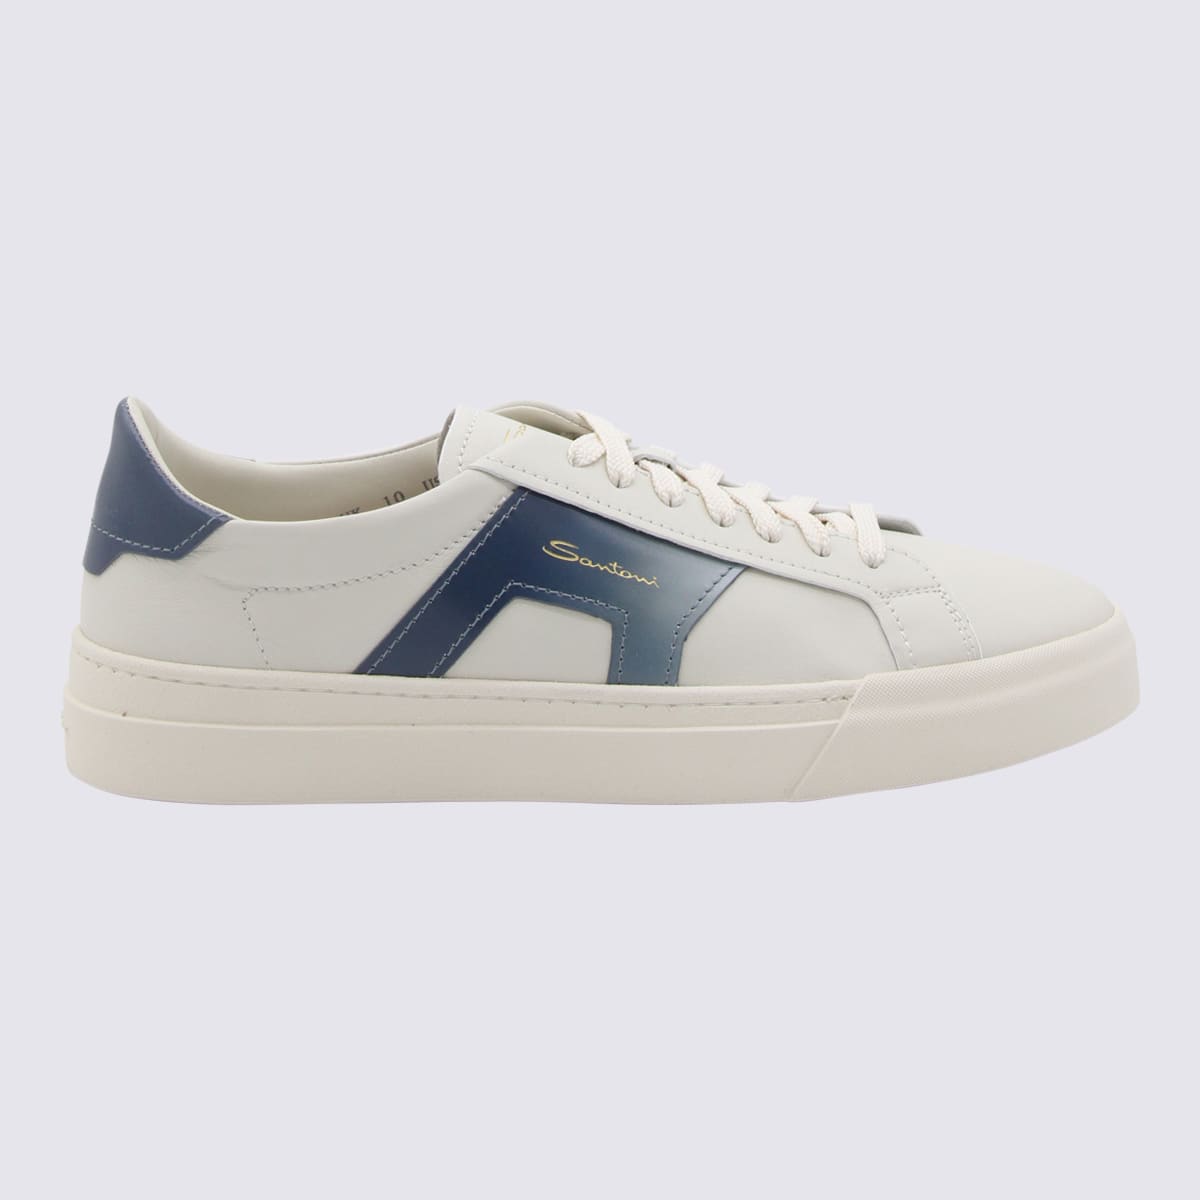 Santoni White And Blue Leather Buckle Sneakers